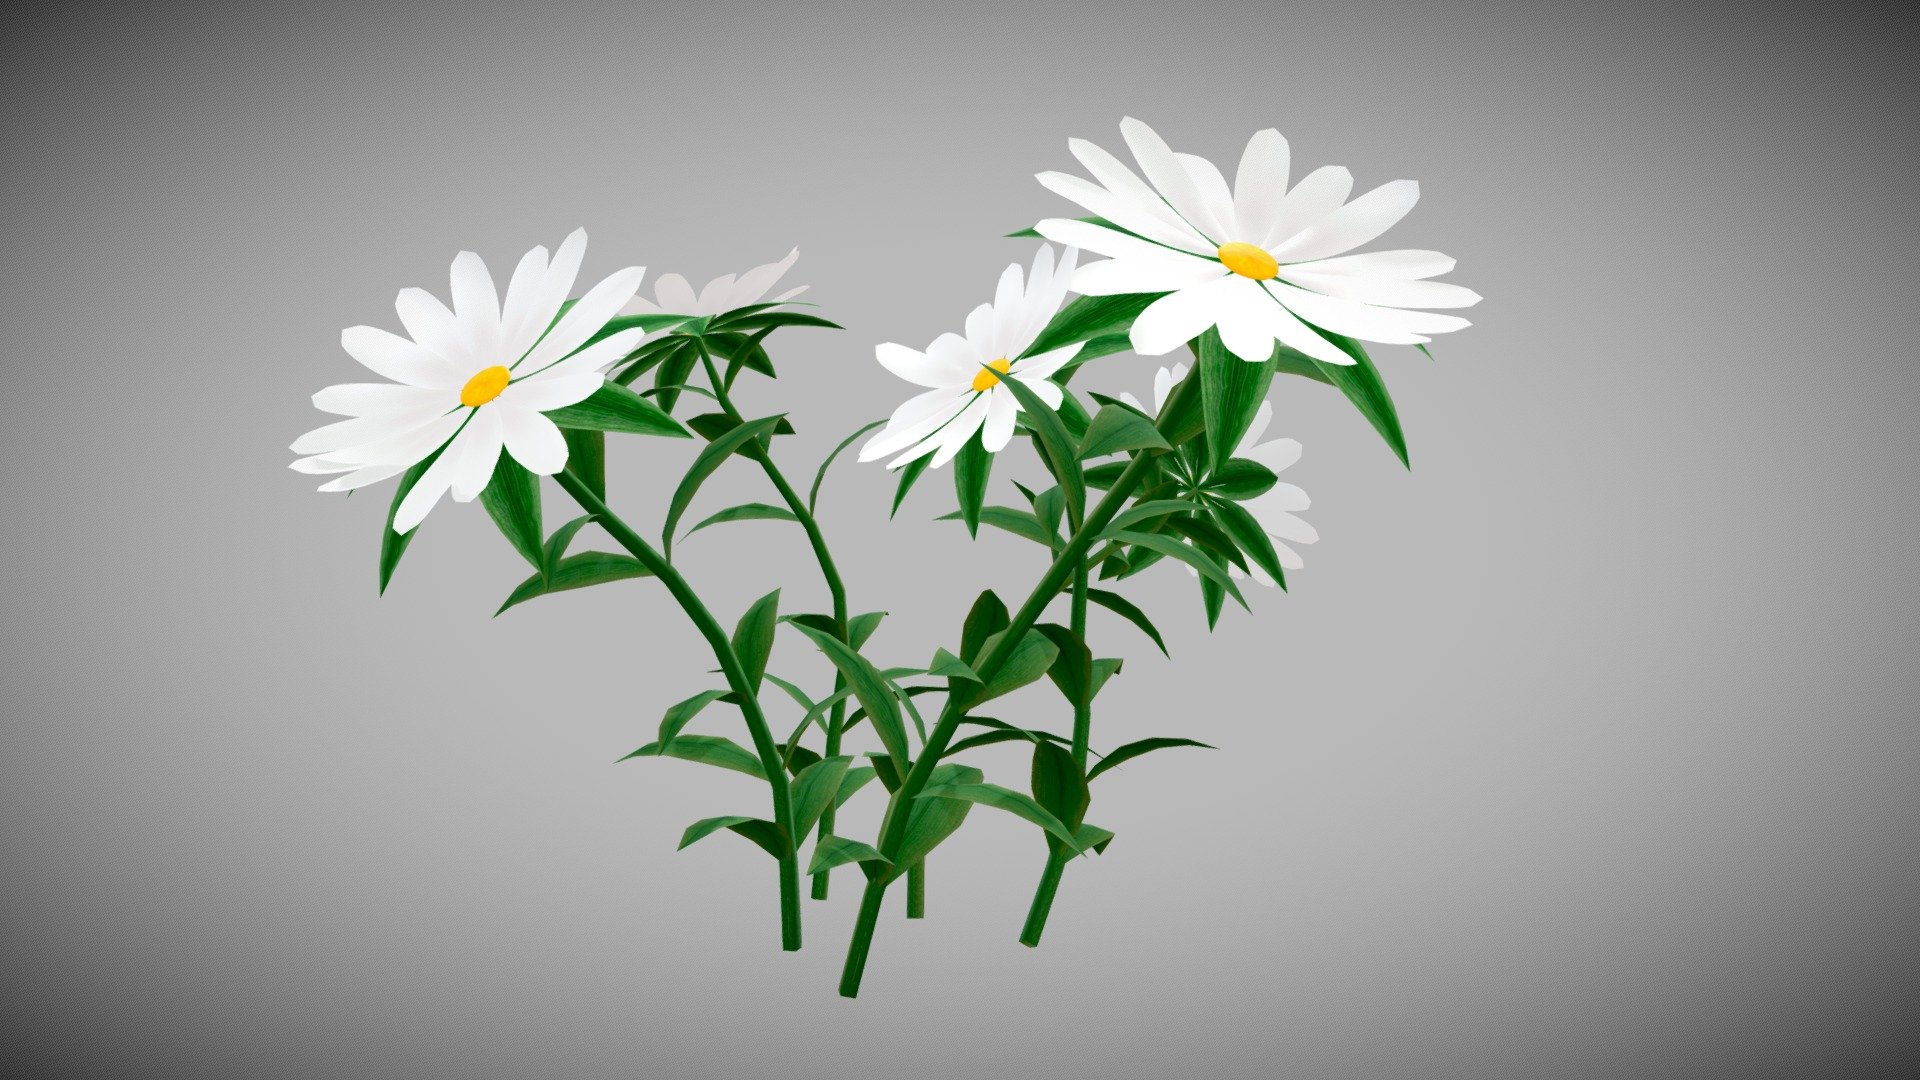 White Chamomiles  / Flowers / Low poly / Game ready/
Beautiful forest flower that is suitable for interior, exterior visualization and game projects. Realistic model with texture, uv map. Ready for use in game engines, visualization or animation. Advanced Render . Nо plugins. It's simple, take it and use it! Enviroments and lighting setups are not included, but let me know if you want them. If you have any queston about format , contact me please. Please don't forget to rate the model, for us it is very important . Total number of polygons: 4710 3d model